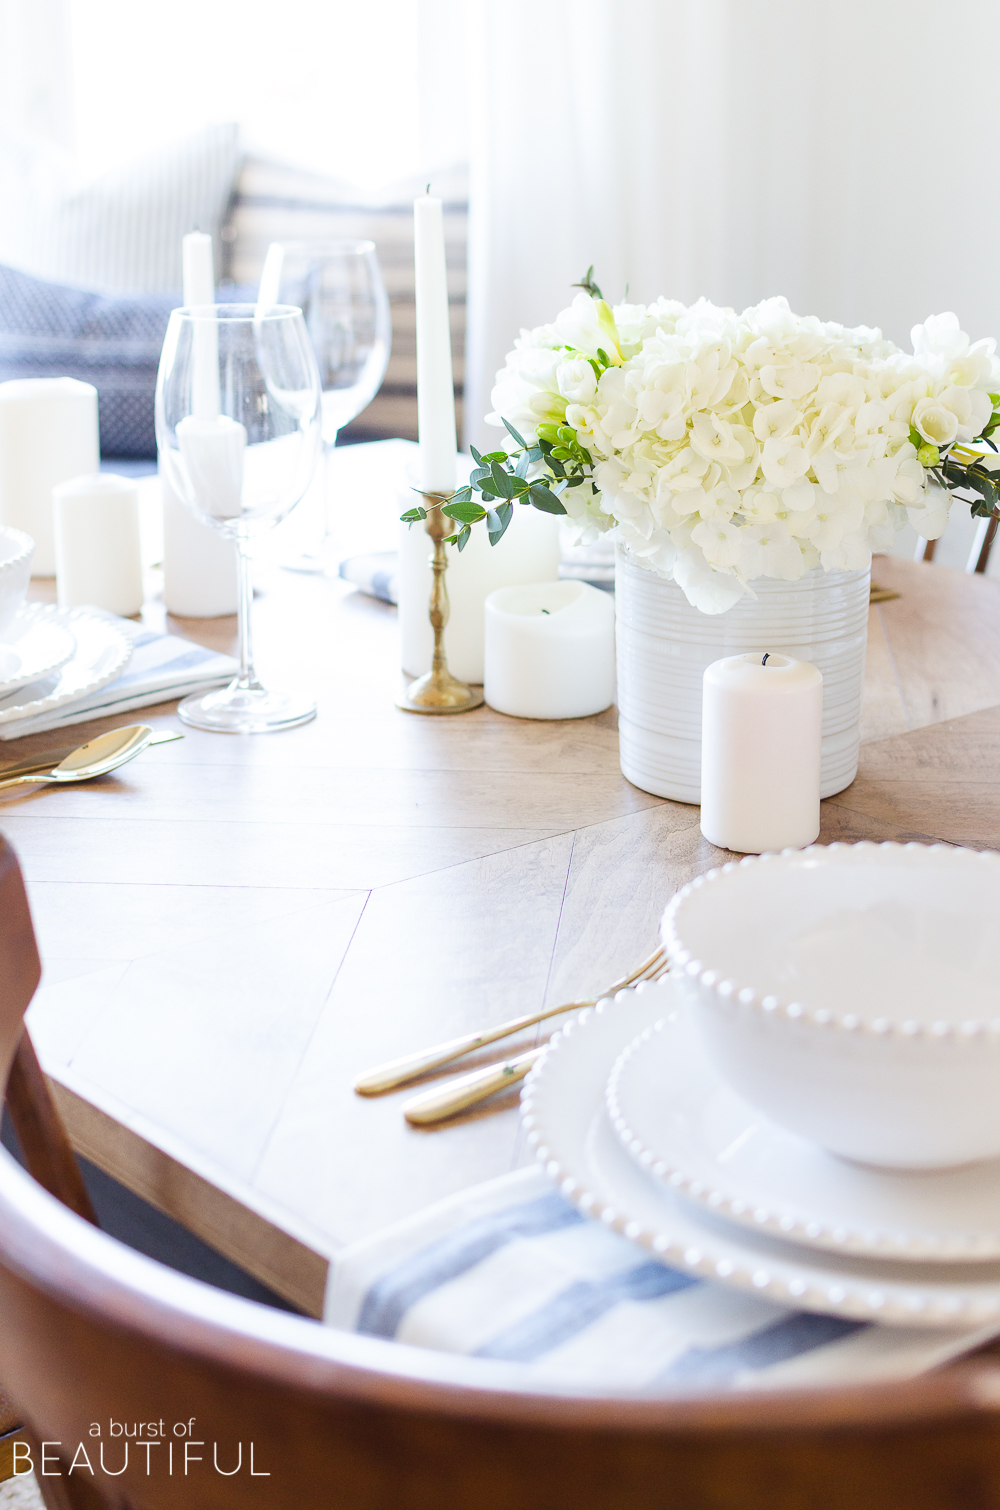 A simple spring tablescape set in a classic blue and white color palette with a centerpiece of white hydrangeas and crocuses leads to easy spring entertaining.